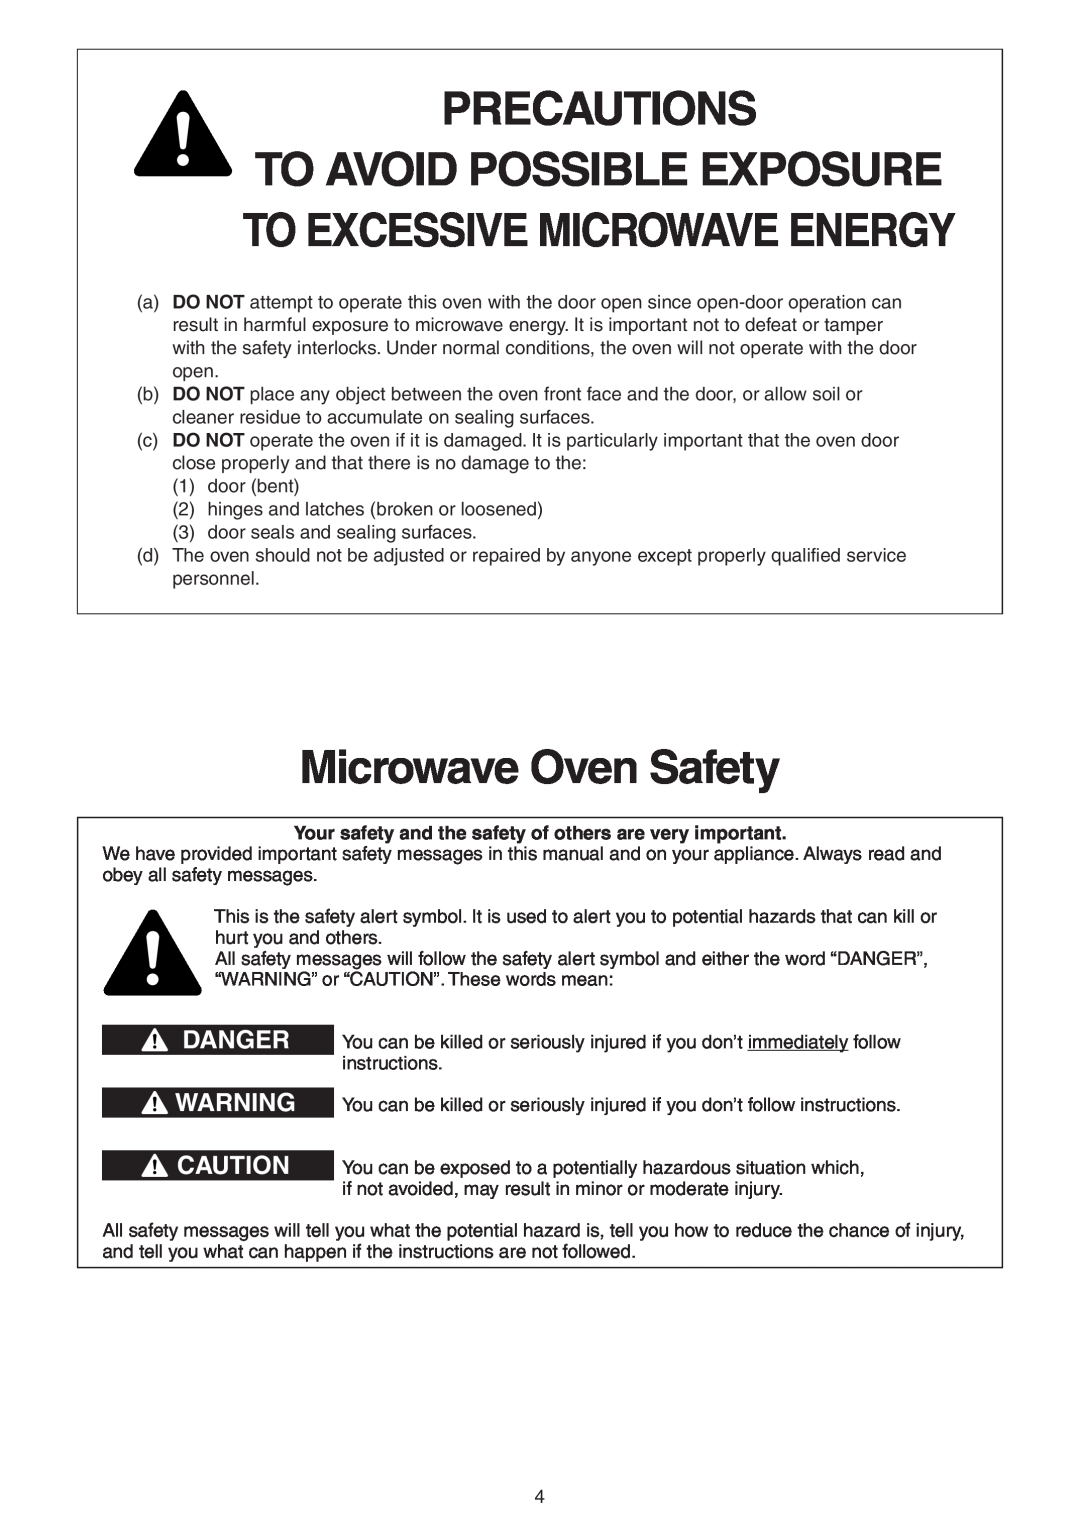 Panasonic NN-CD989S Precautions, Microwave Oven Safety, To Avoid Possible Exposure To Excessive Microwave Energy, Danger 